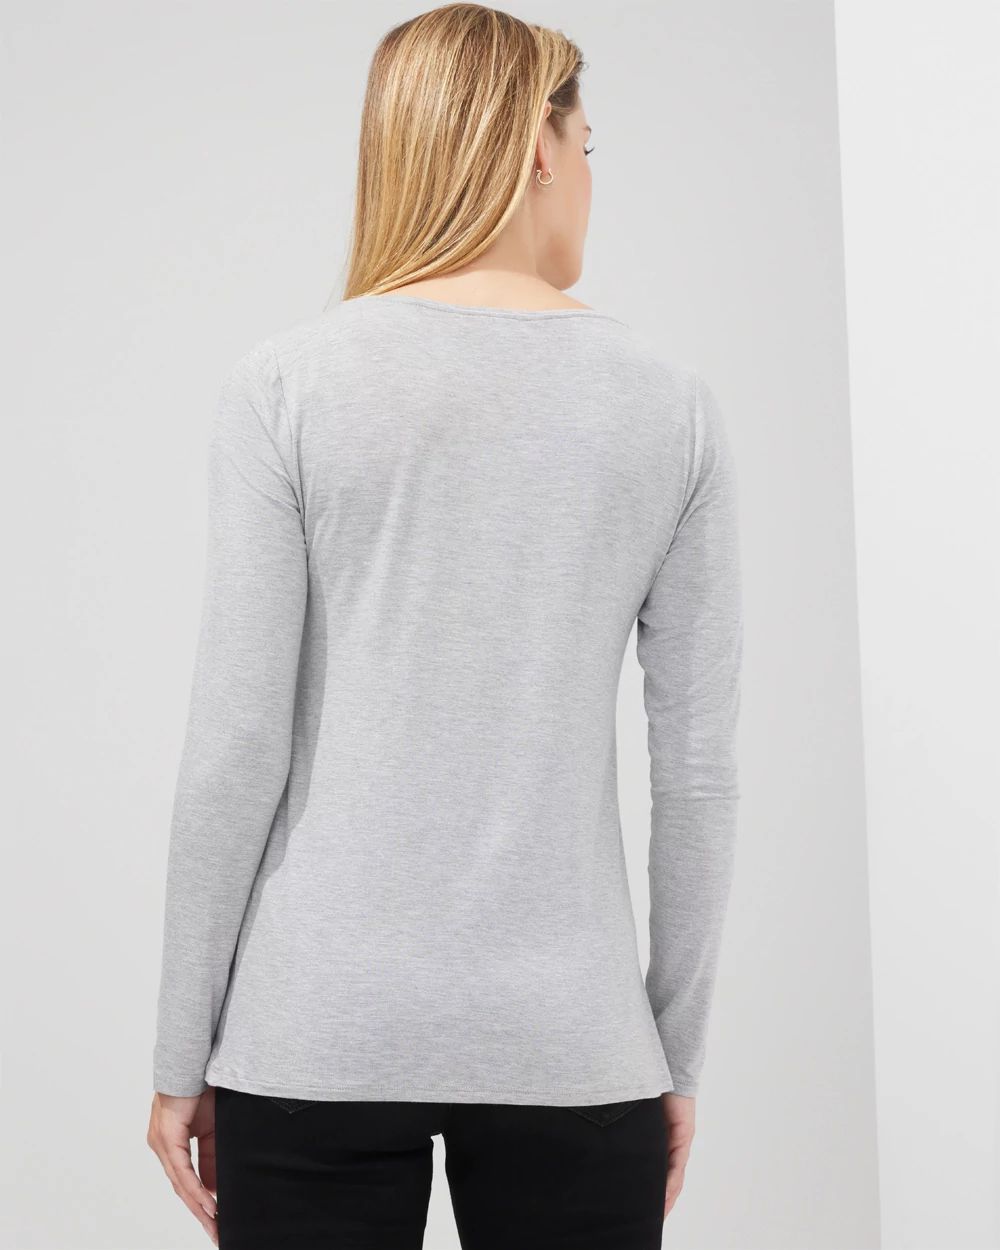 Outlet WHBM Long-Sleeve Scoop-Neck Tee click to view larger image.